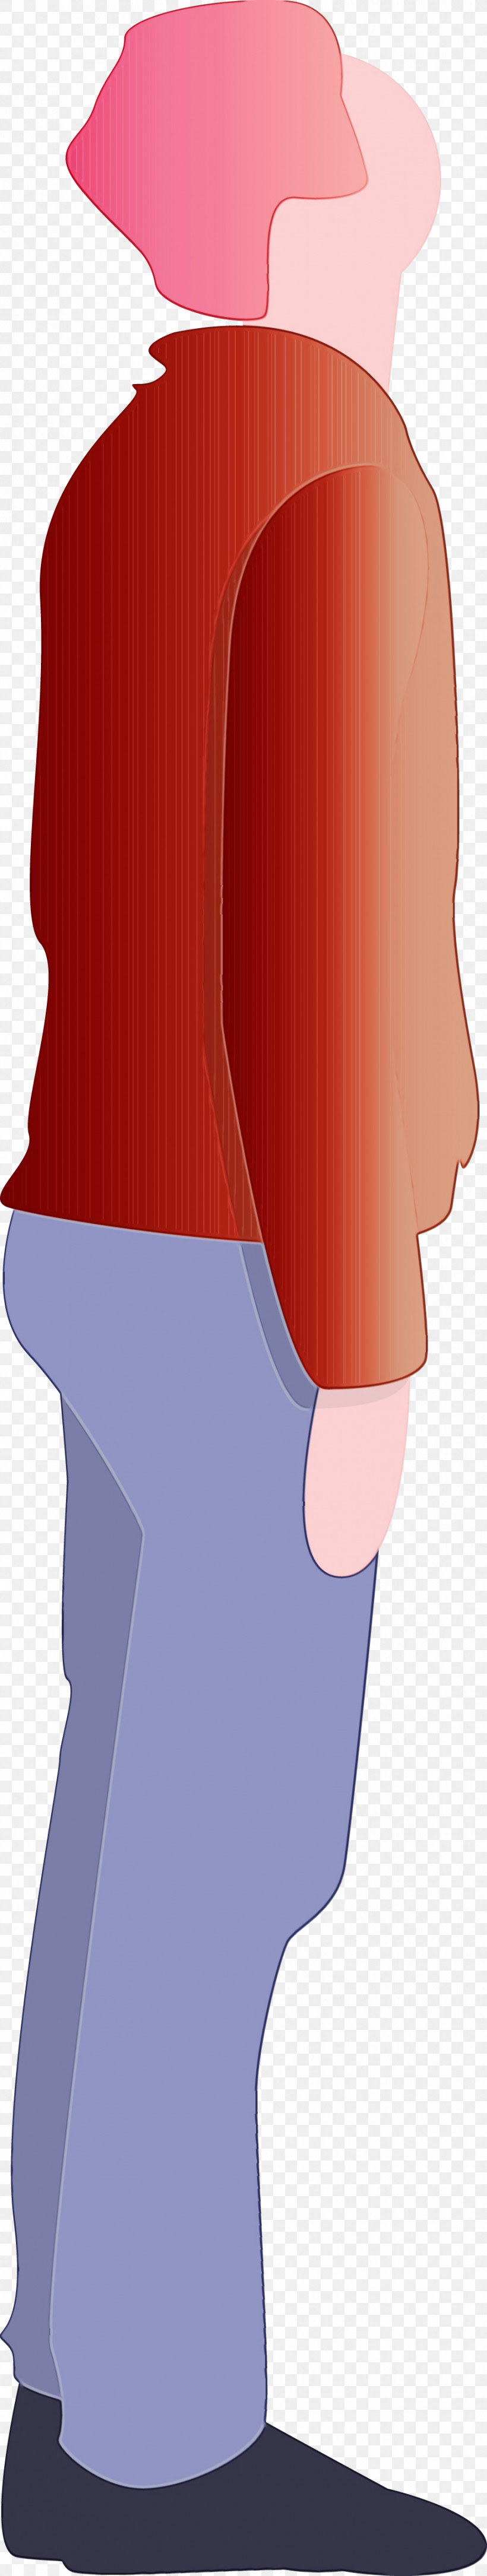 Red Joint Arm Leg Sleeve, PNG, 915x4843px, Man Looking Up, Arm, Elbow, Human Leg, Joint Download Free